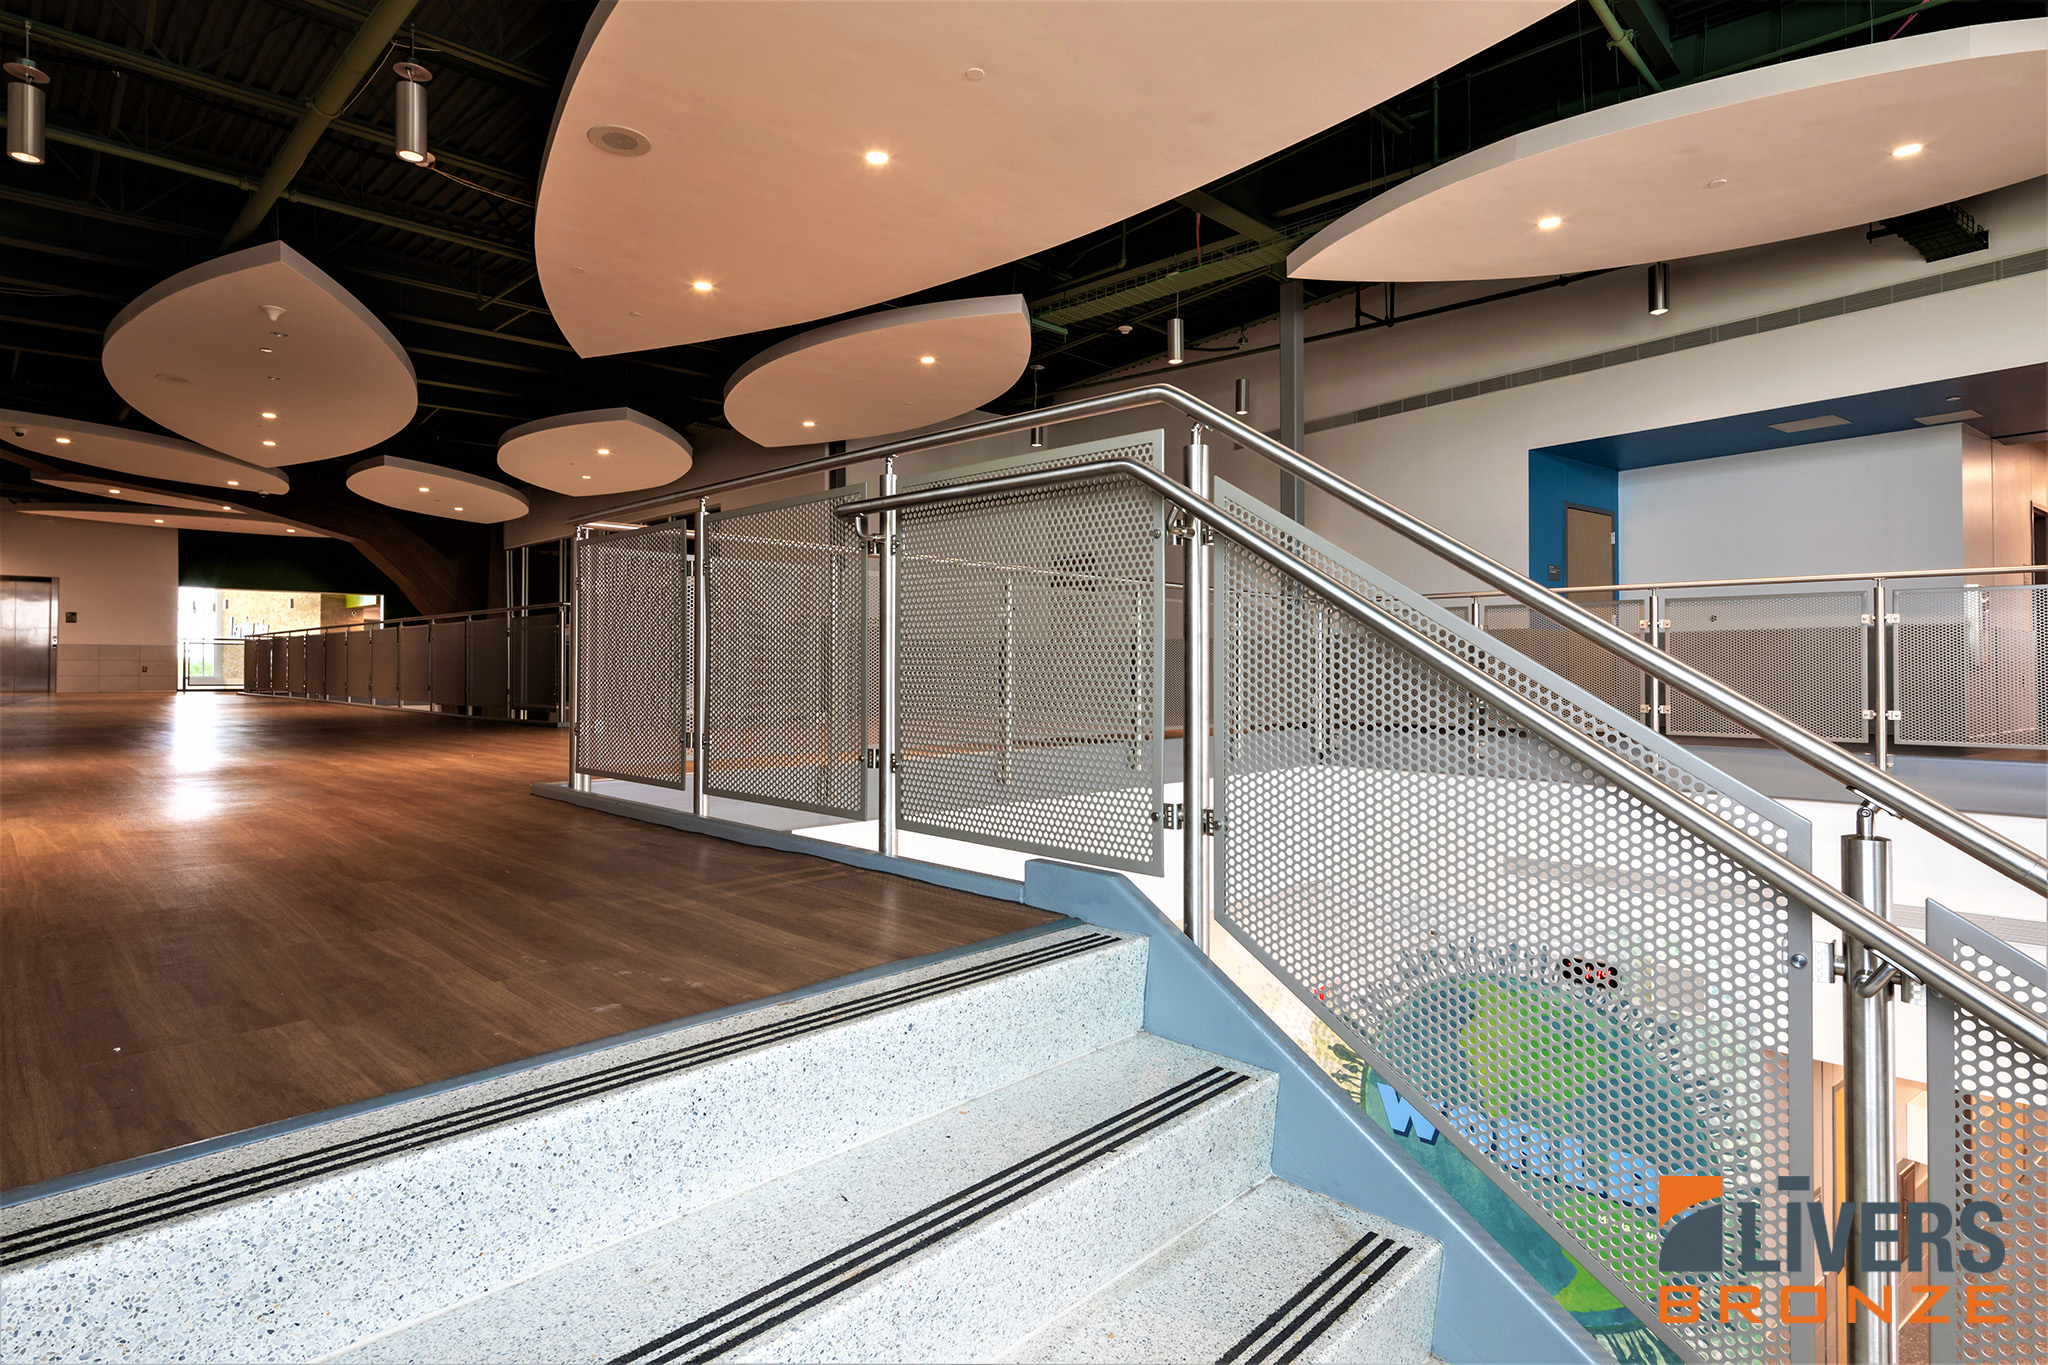 Livers Bronze Mirage Stainless Steel Railings with Decorative Perforated Panels were installed at the interior stairways and balconies at Red Bud Elementary School, Austin, Texas, and were Made in the USA